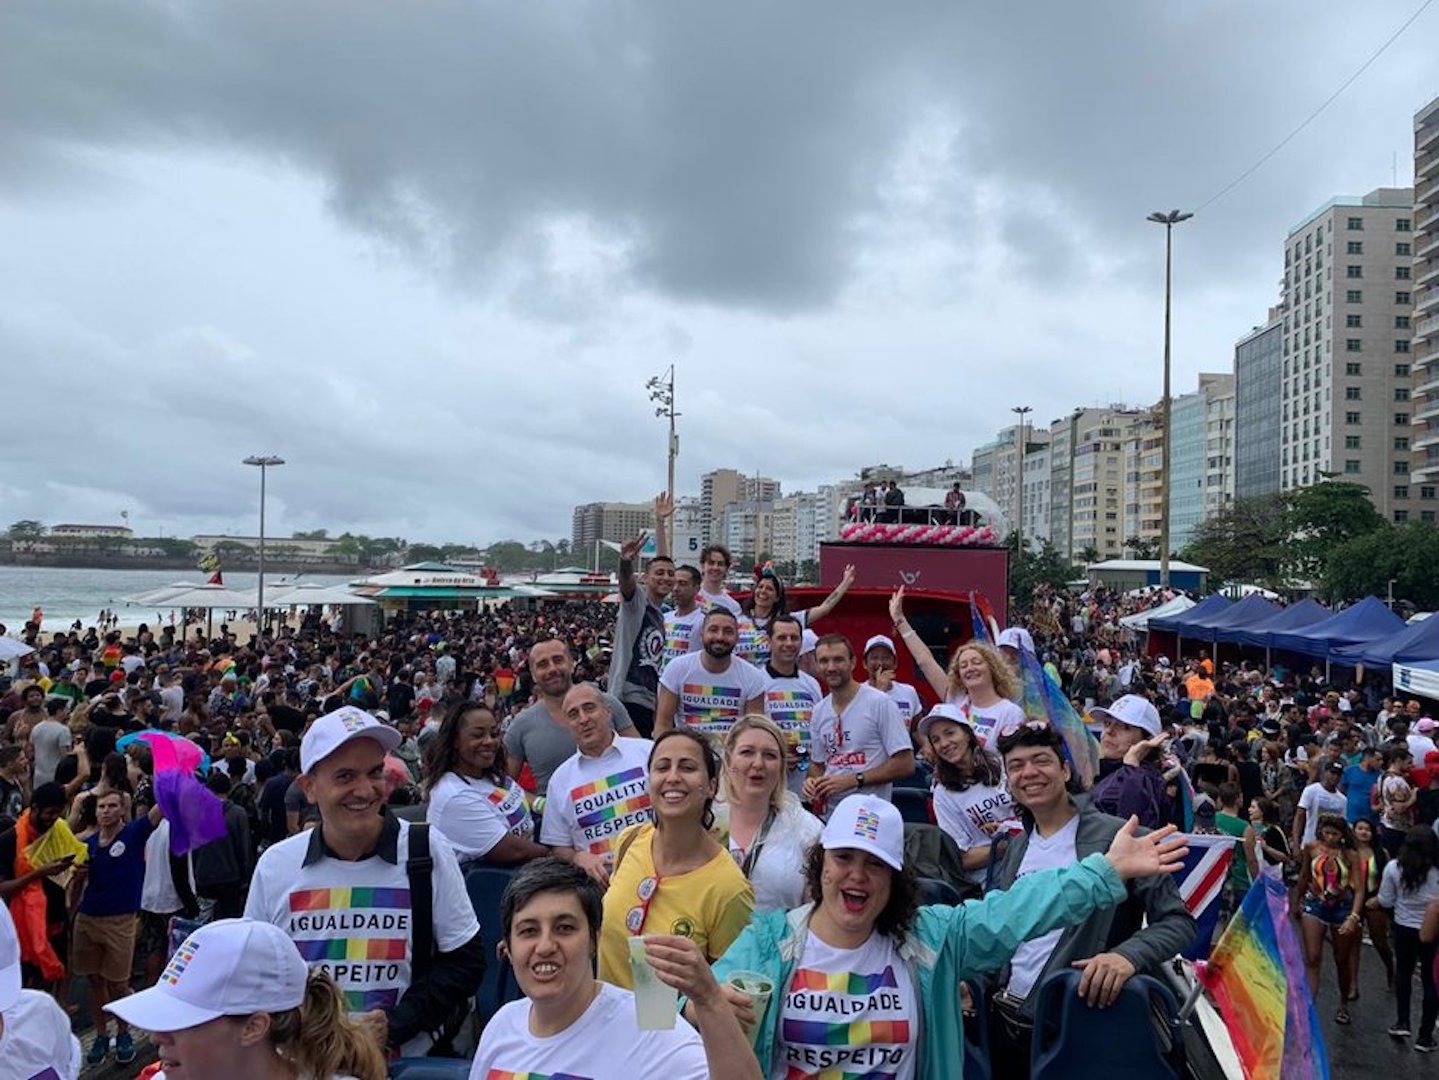 Brazil,More than 20 consular offices gathered together to support the LGBTi parade in Rio in September.